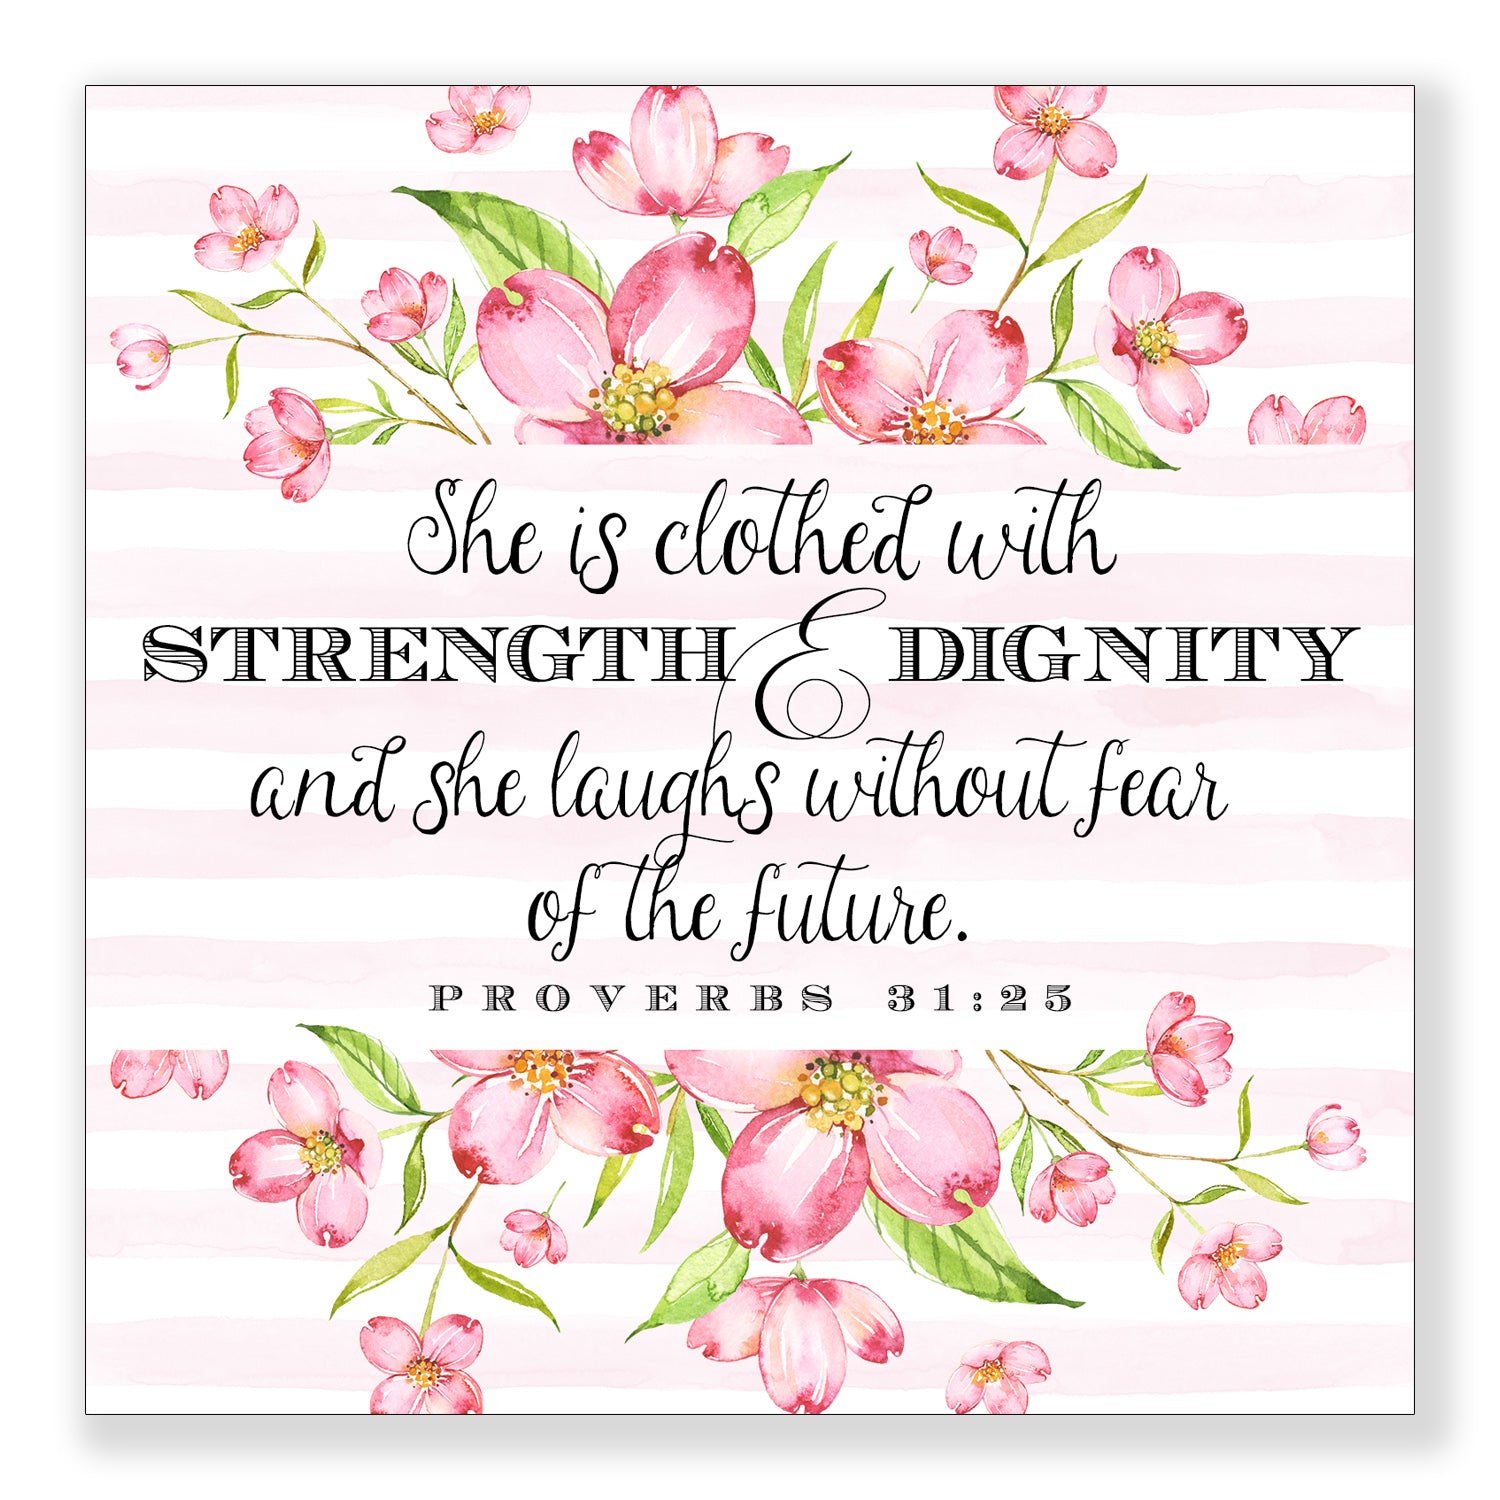 Strength and Dignity (Proverbs 31:25) - Frameable Print